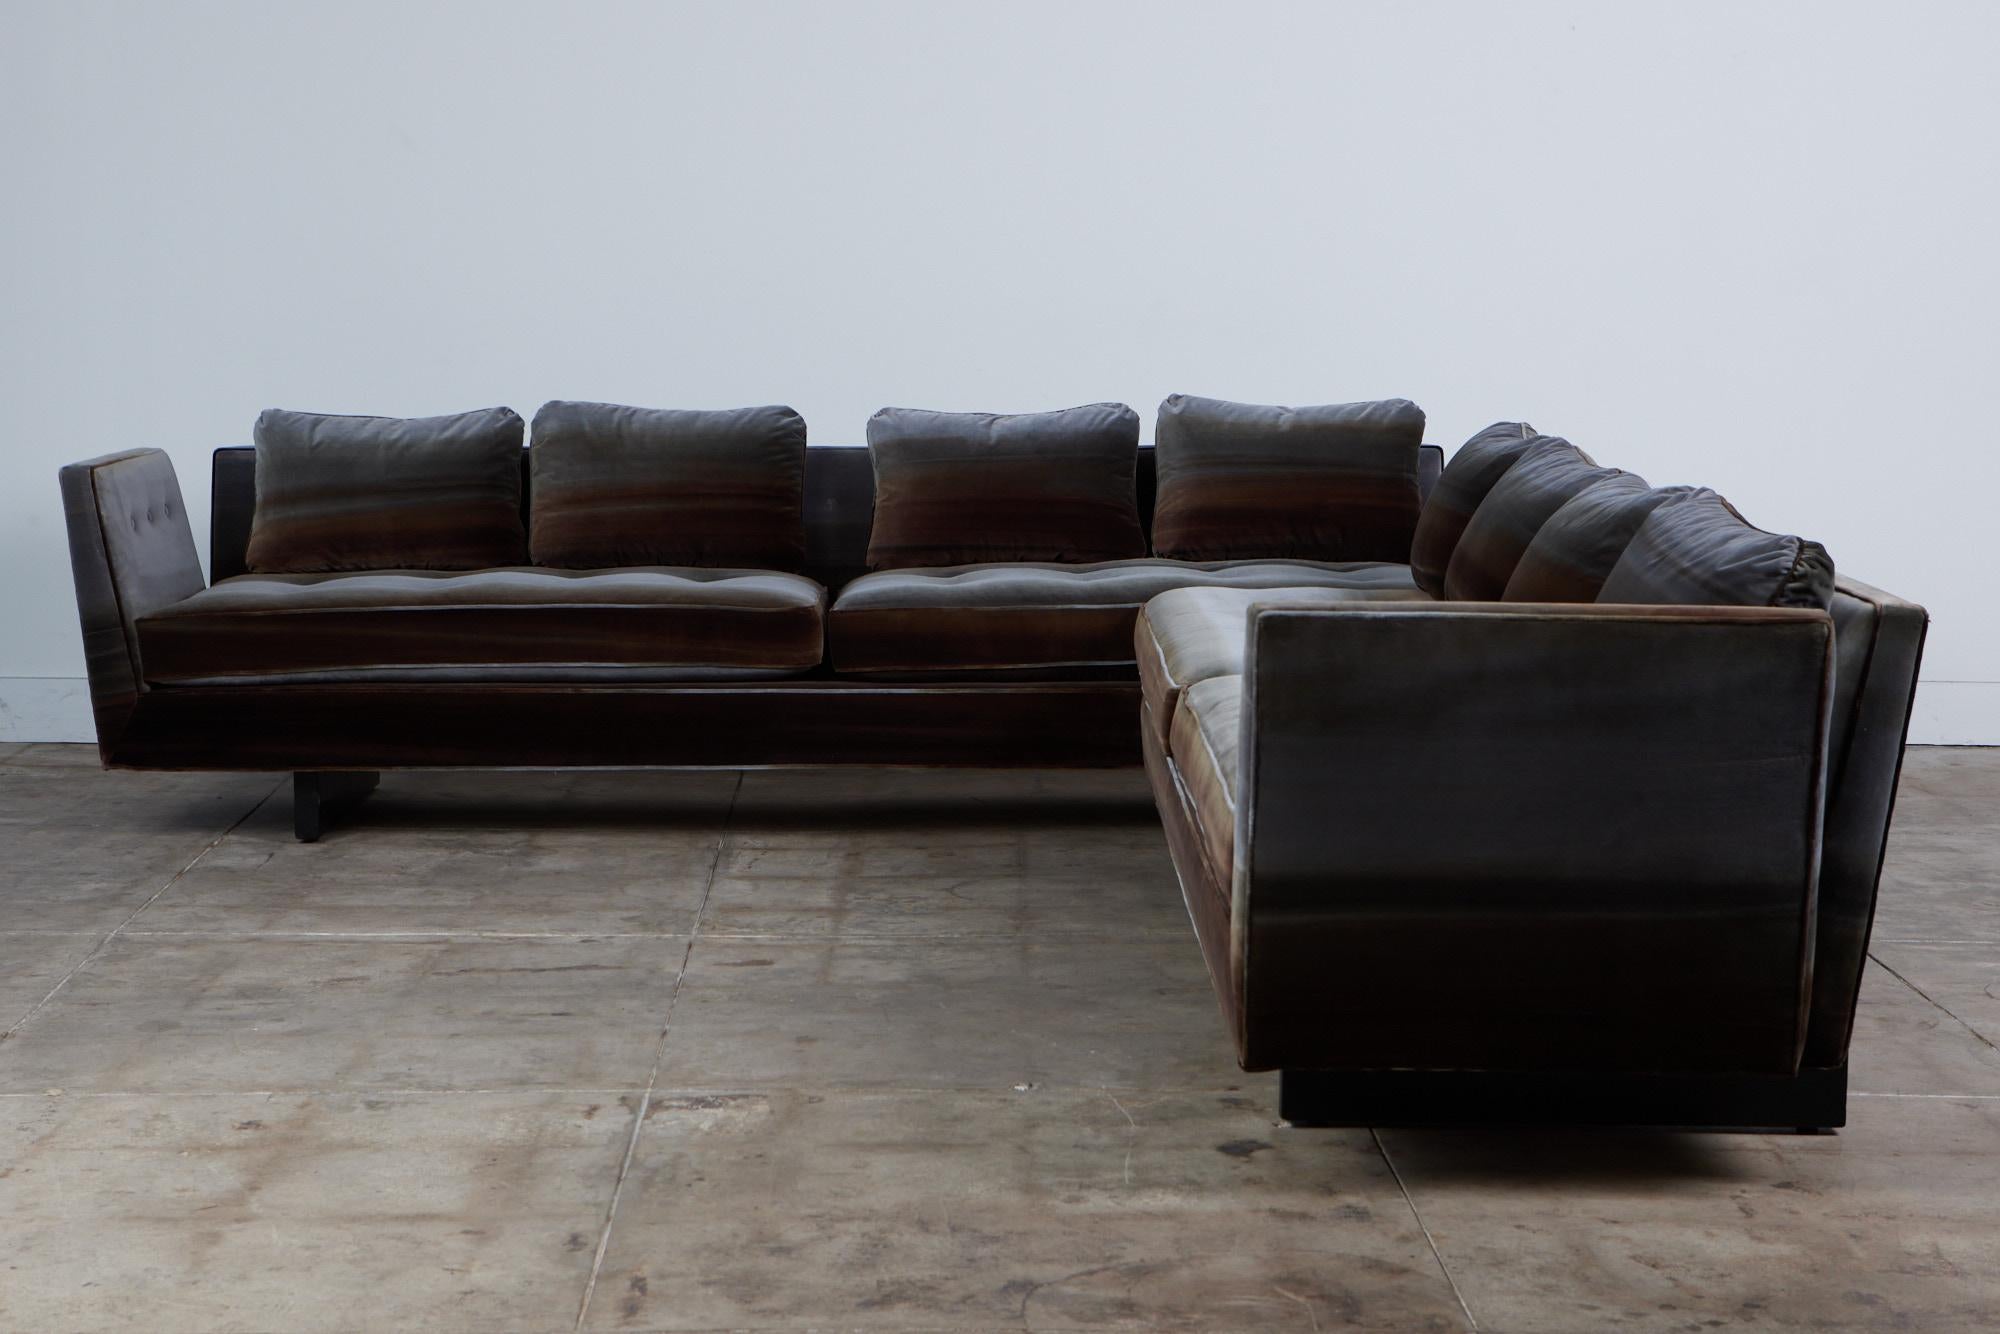 Mid-20th Century Sectional Sofa by Edward Wormley for Dunbar For Sale